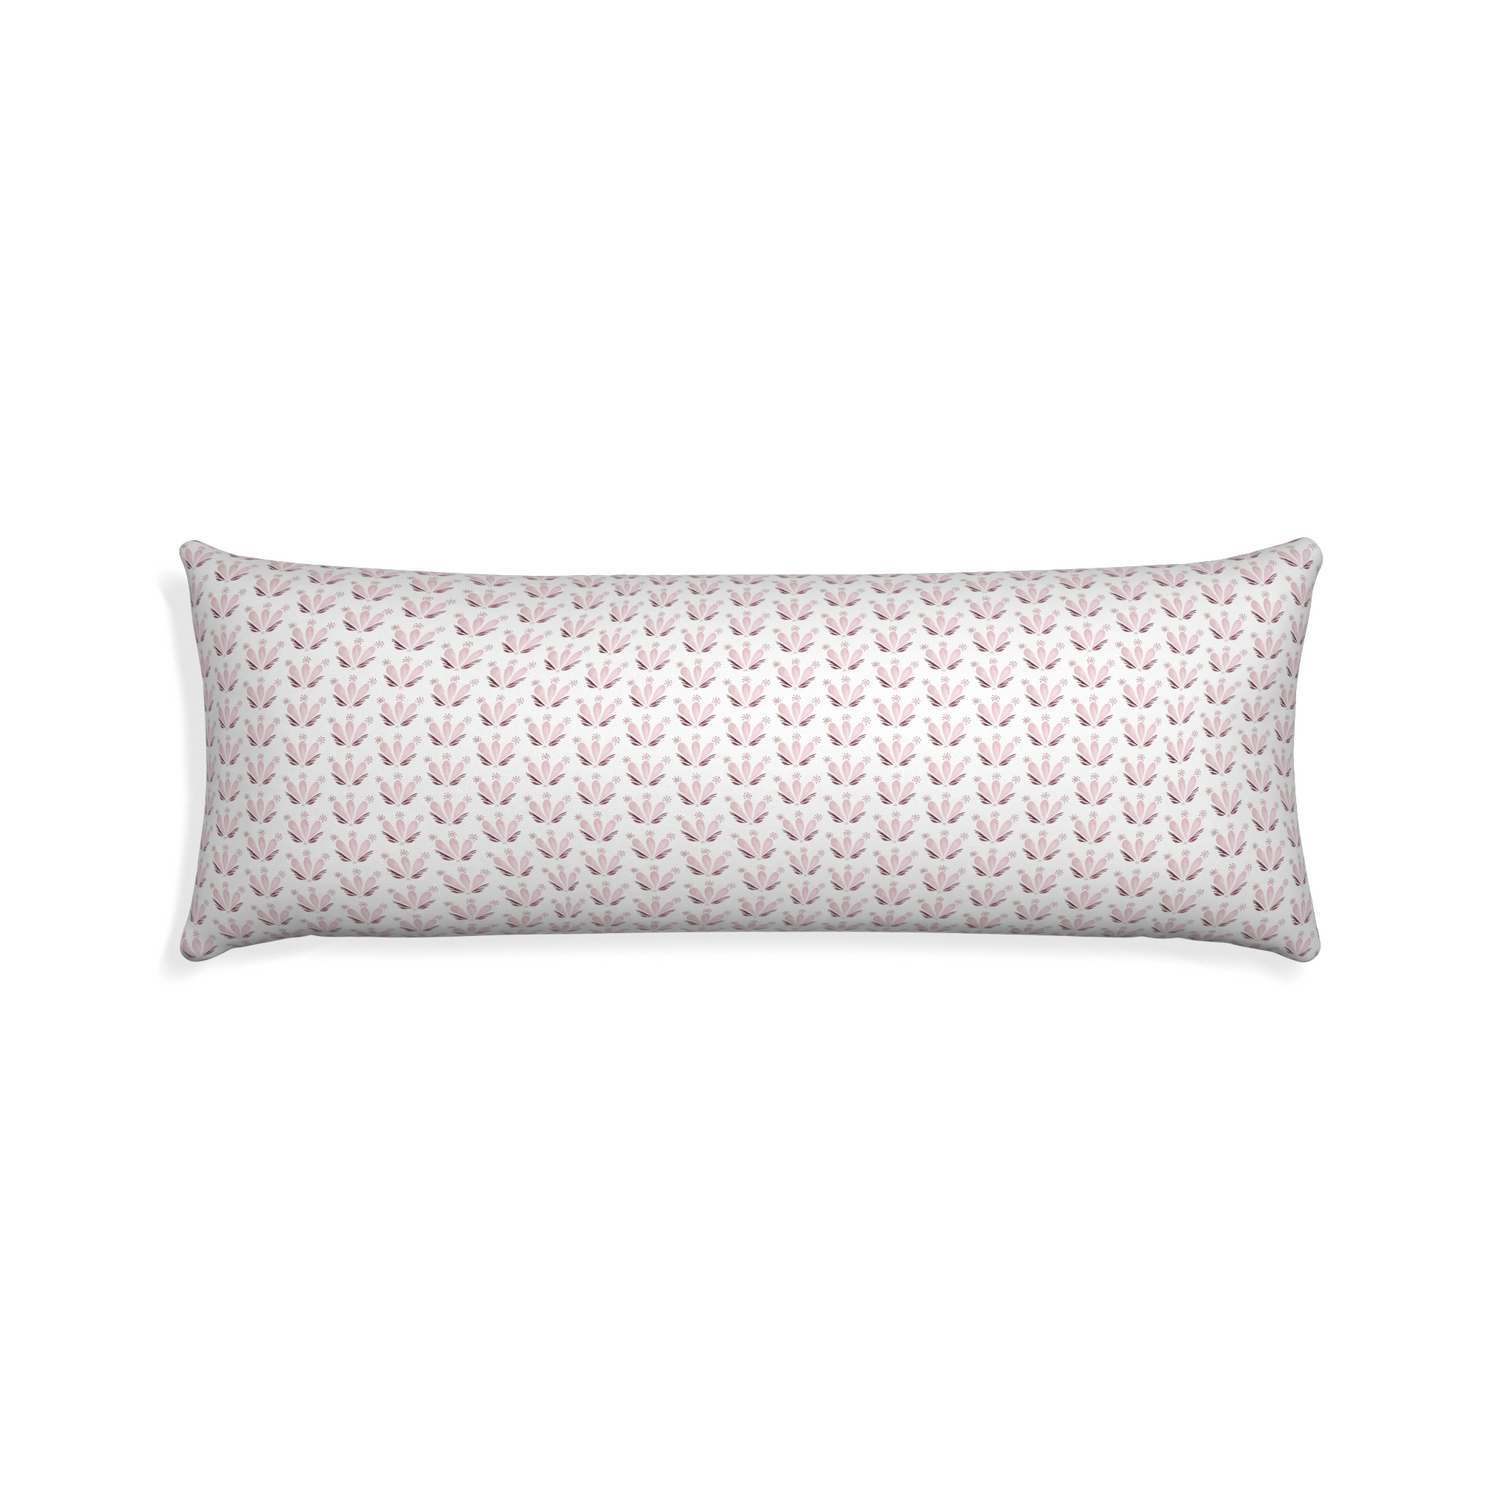 Xl-lumbar serena pink custom pink & burgundy drop repeat floralpillow with none on white background